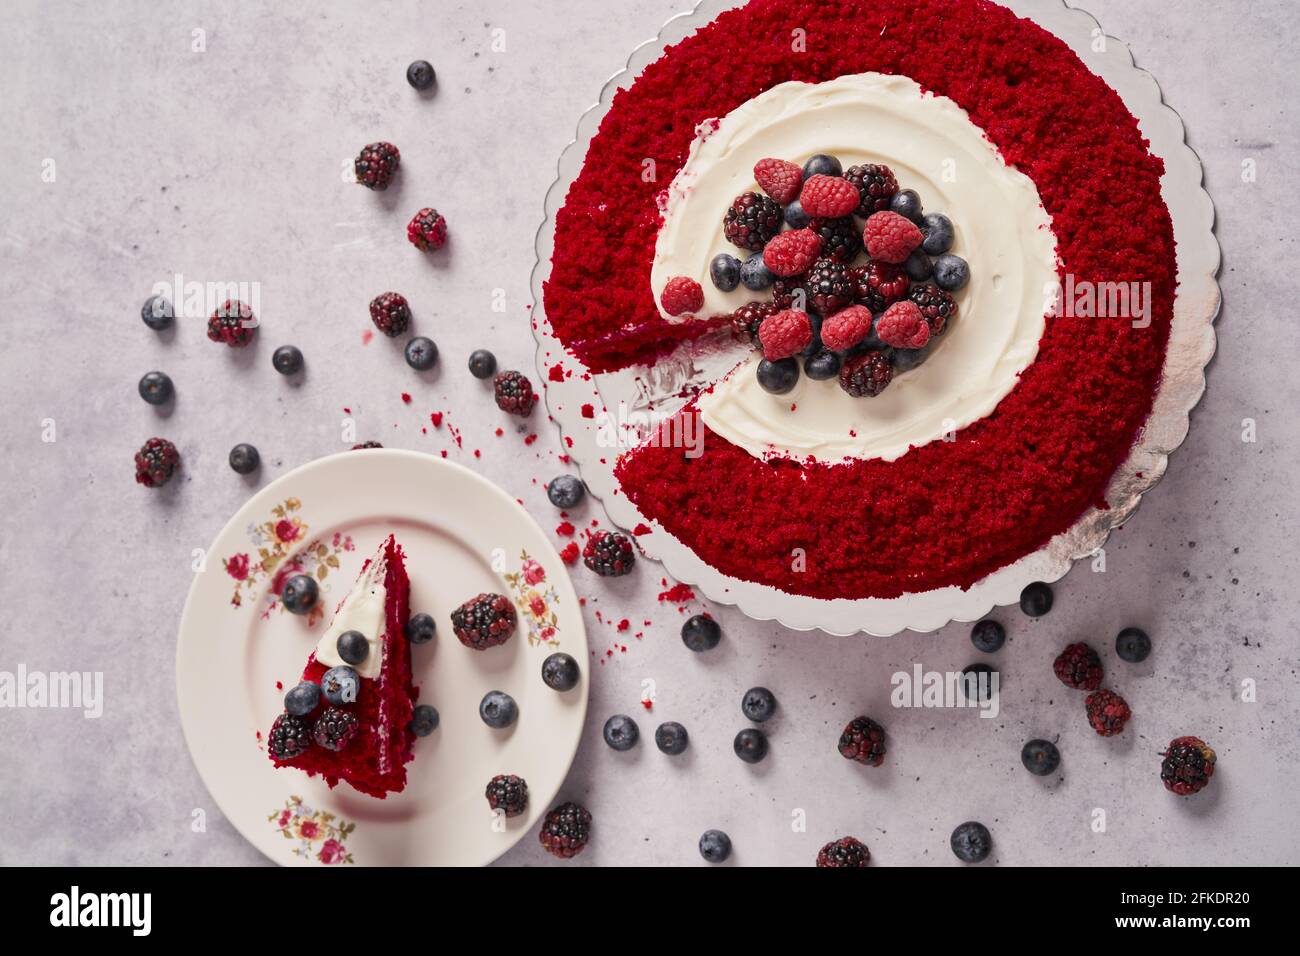 Red velvet bag hi-res stock photography and images - Alamy